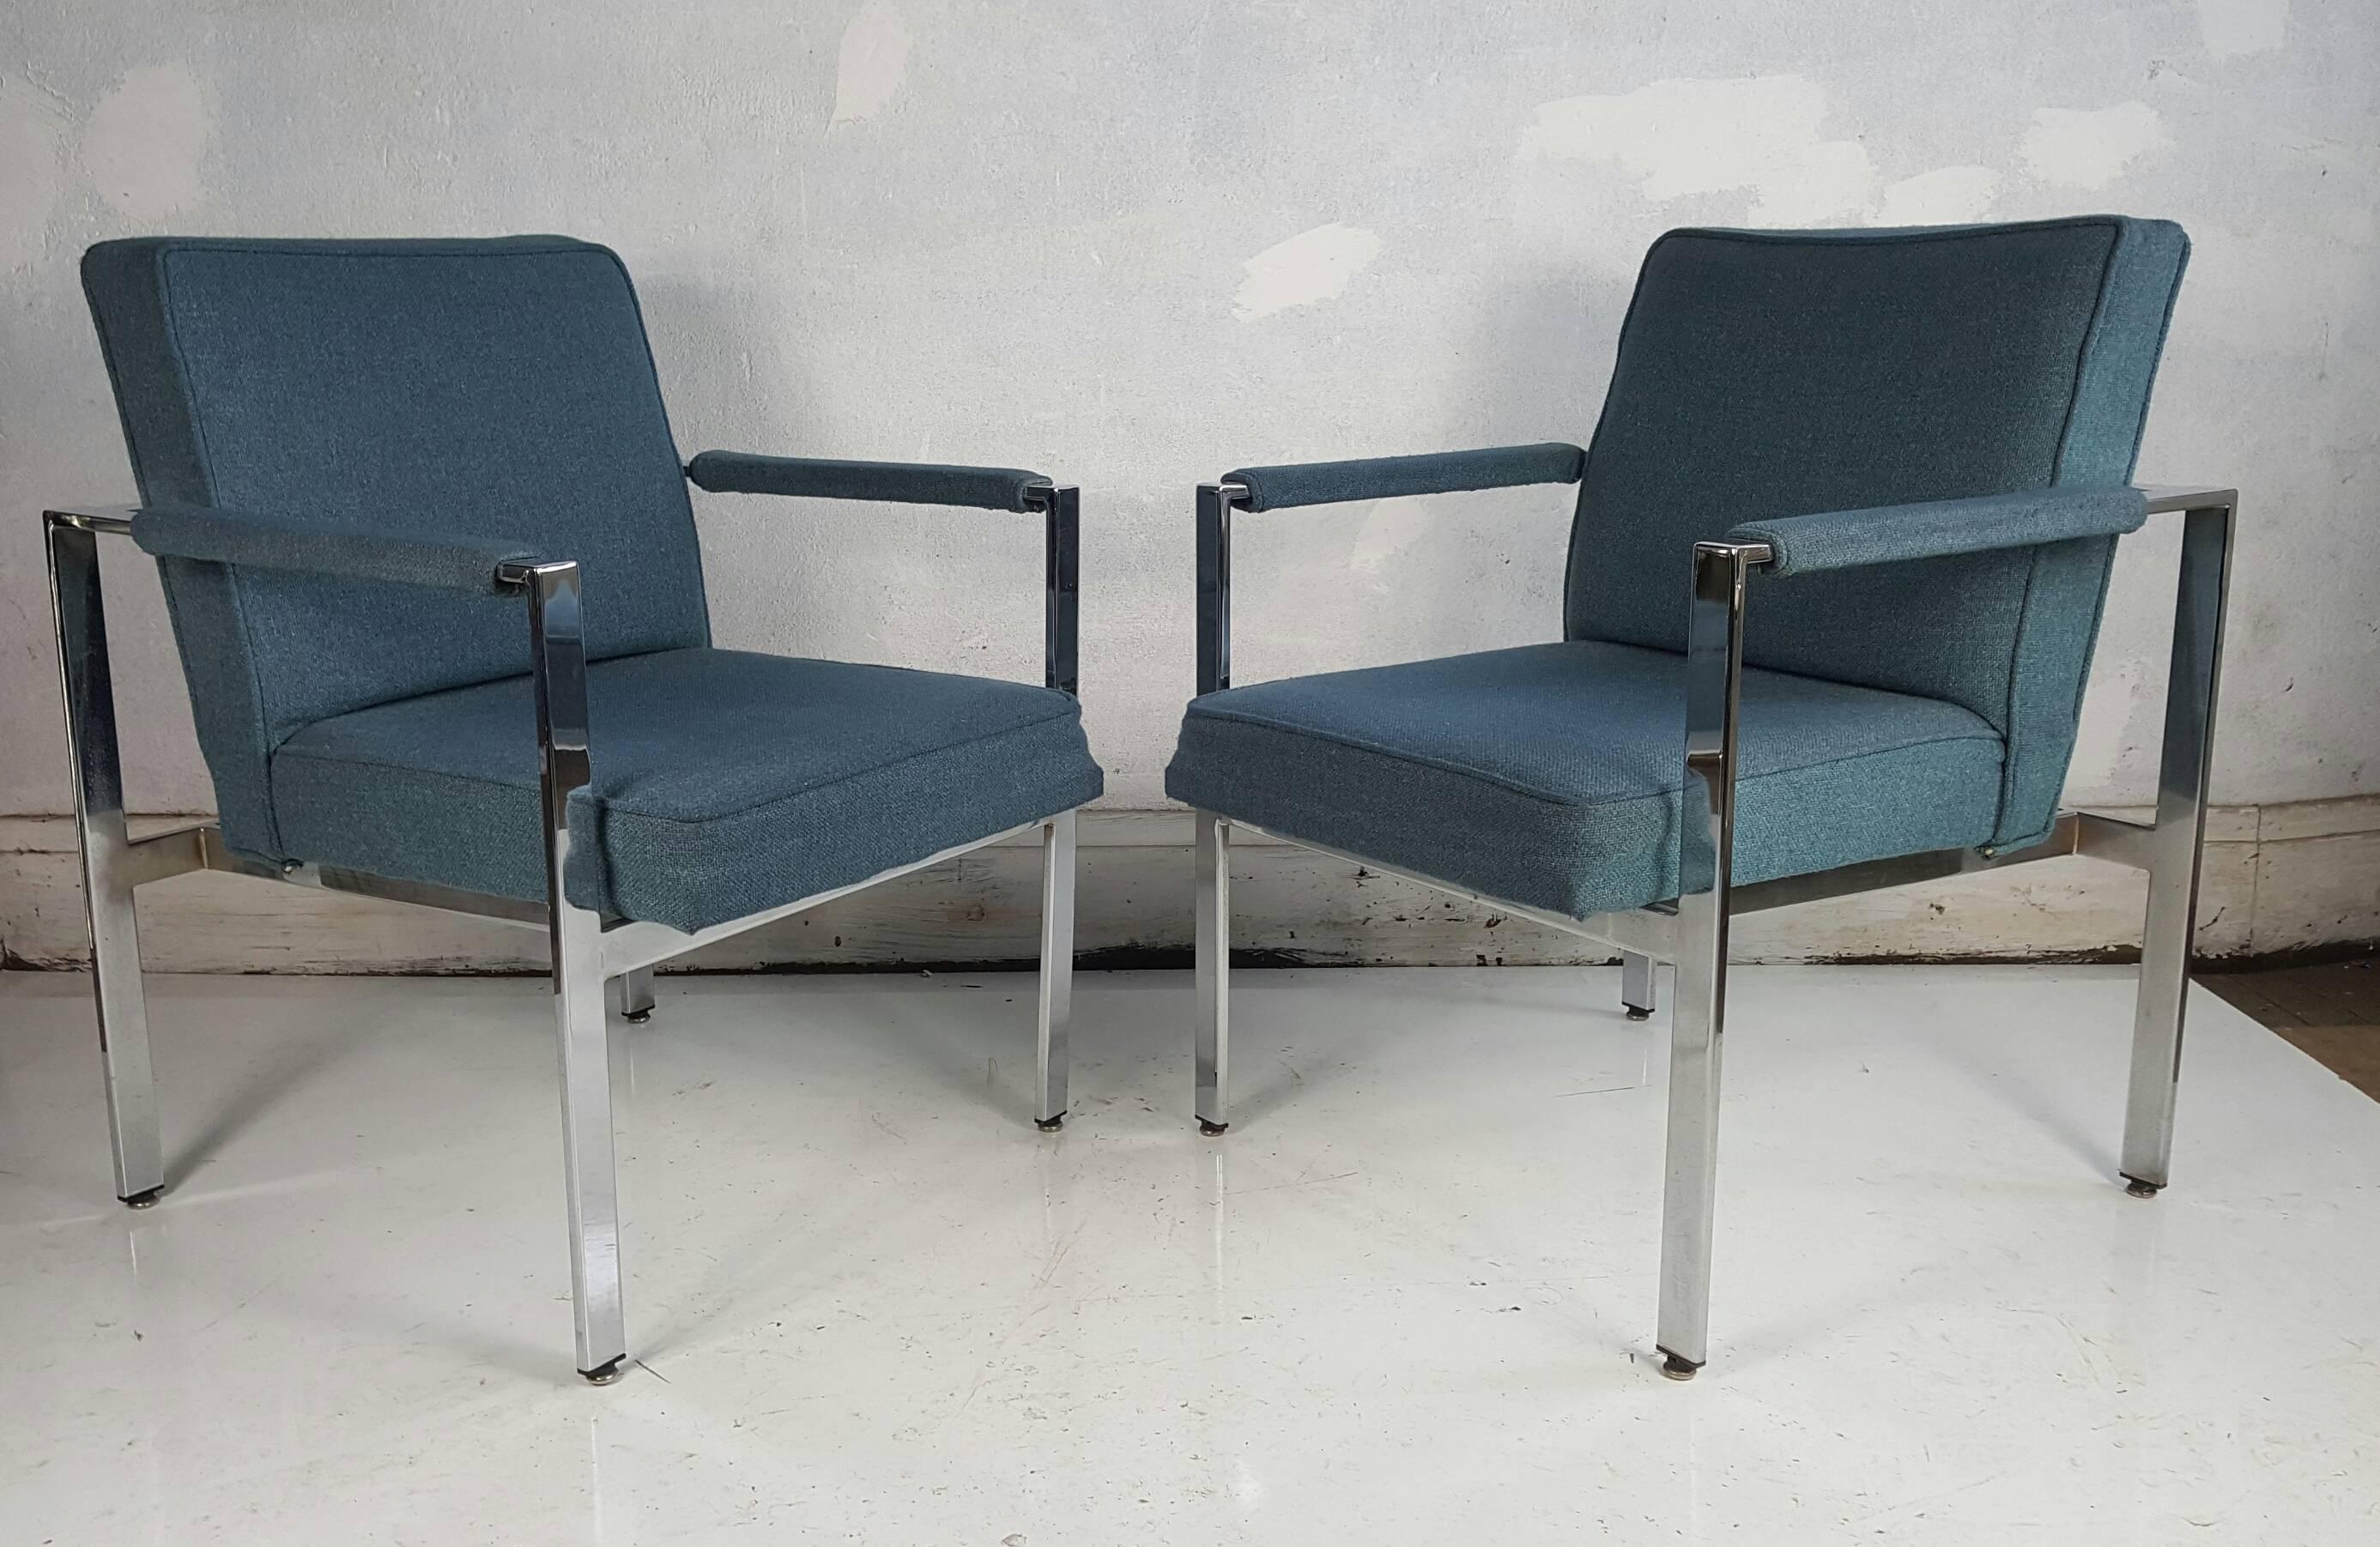 Classic pair of circa 1970s lounge chairs designed by Milo Baughman. Retain original blue wool fabric, nice original condition. Extremely comfortable. Two additionl matching chairs avail (see other listings).